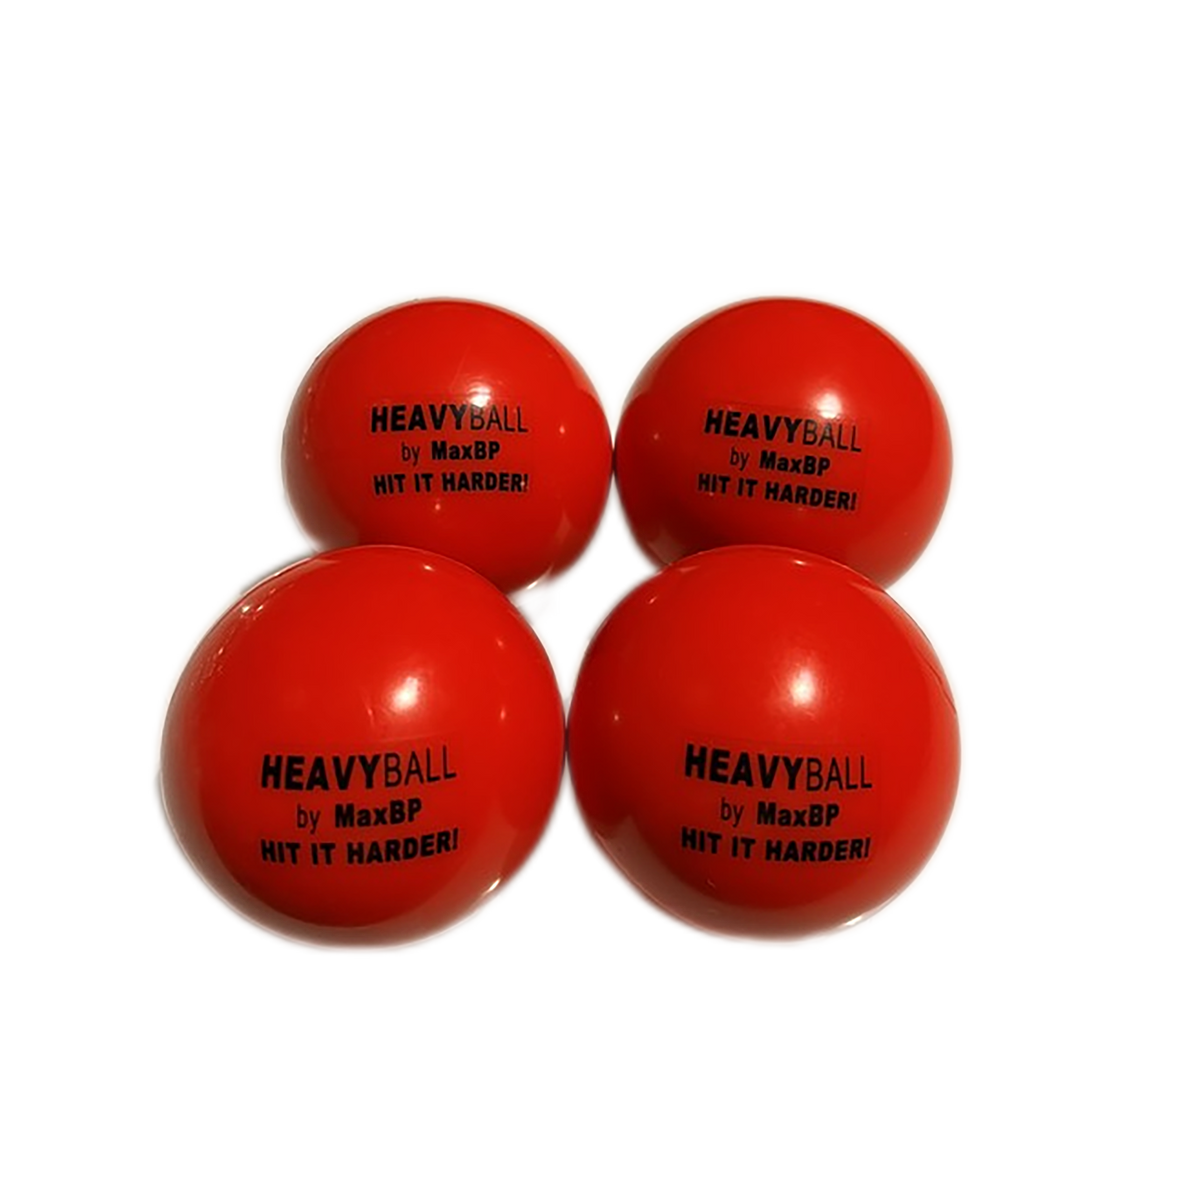 28-67% off - HeavyBall - NEW PRODUCT SPECIAL DEAL